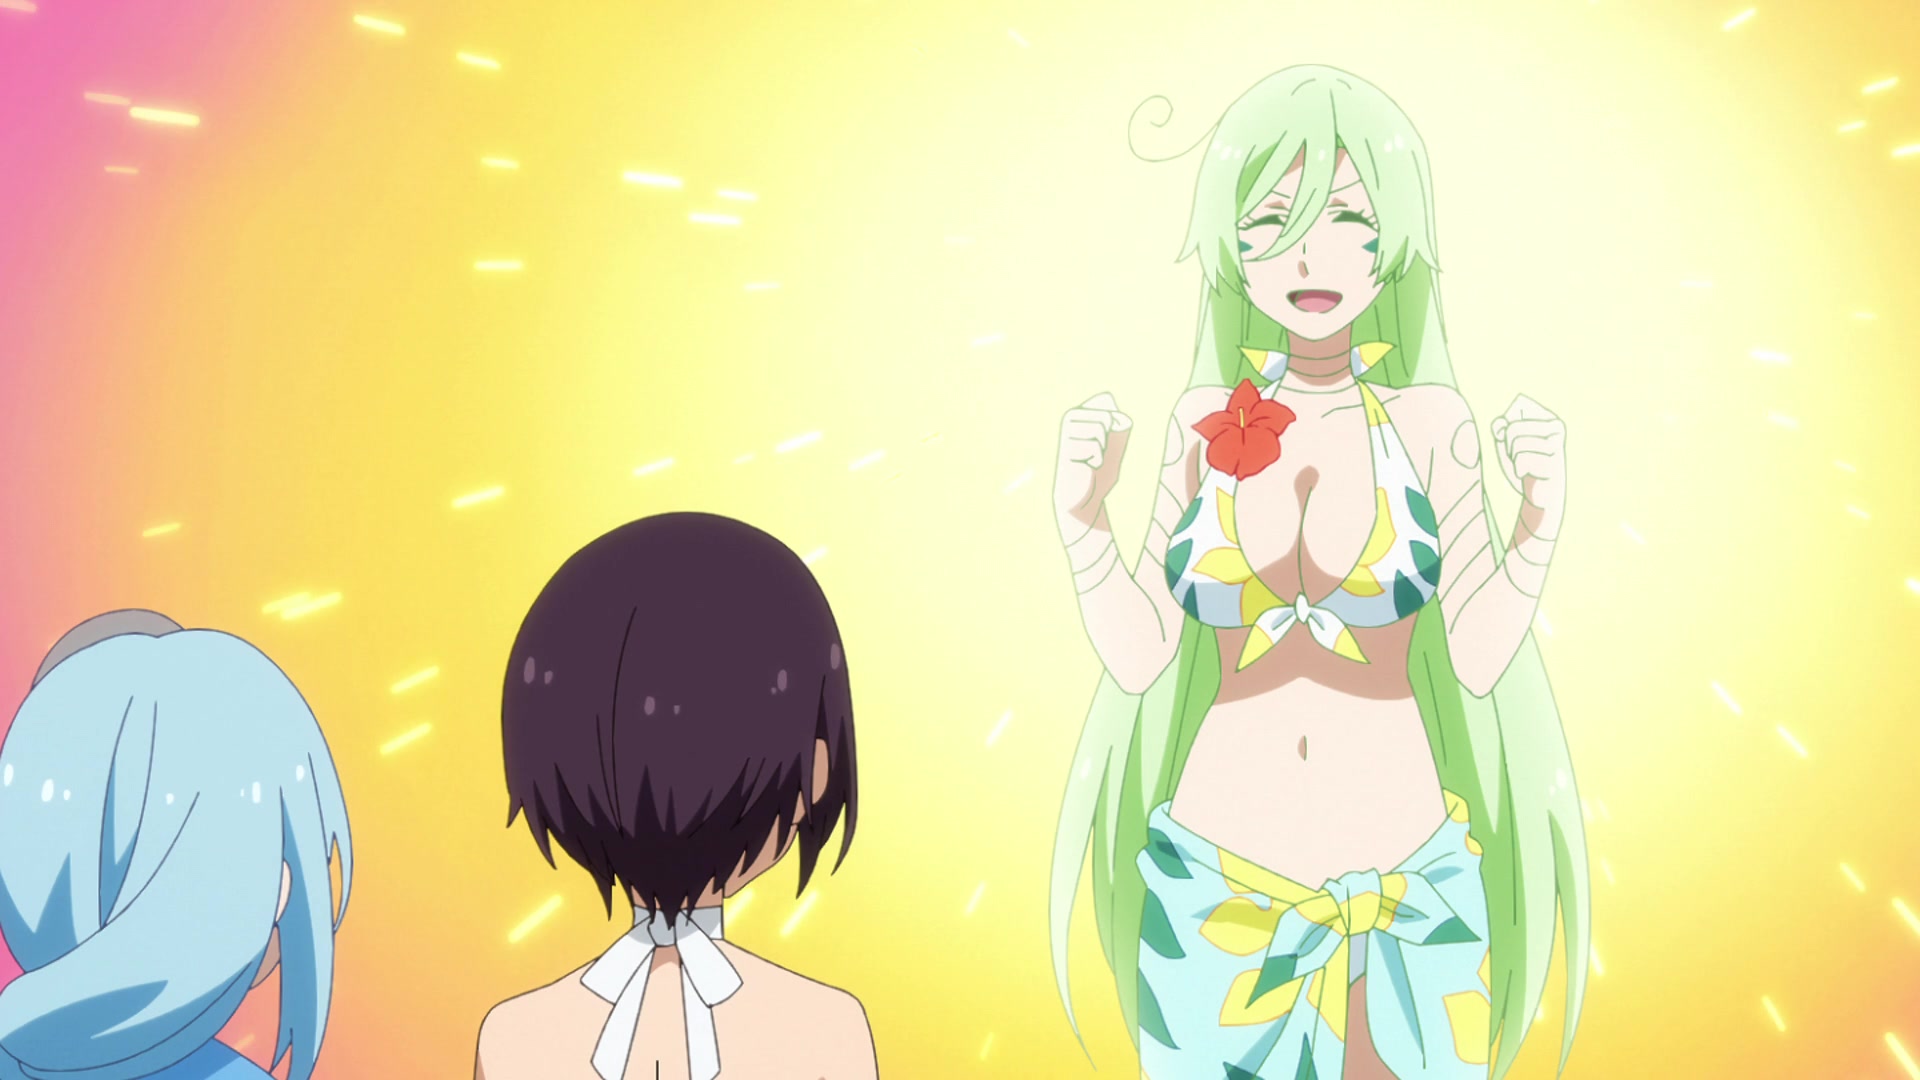 Slime Diaries: That Time I Got Reincarnated as a Slime Images. 